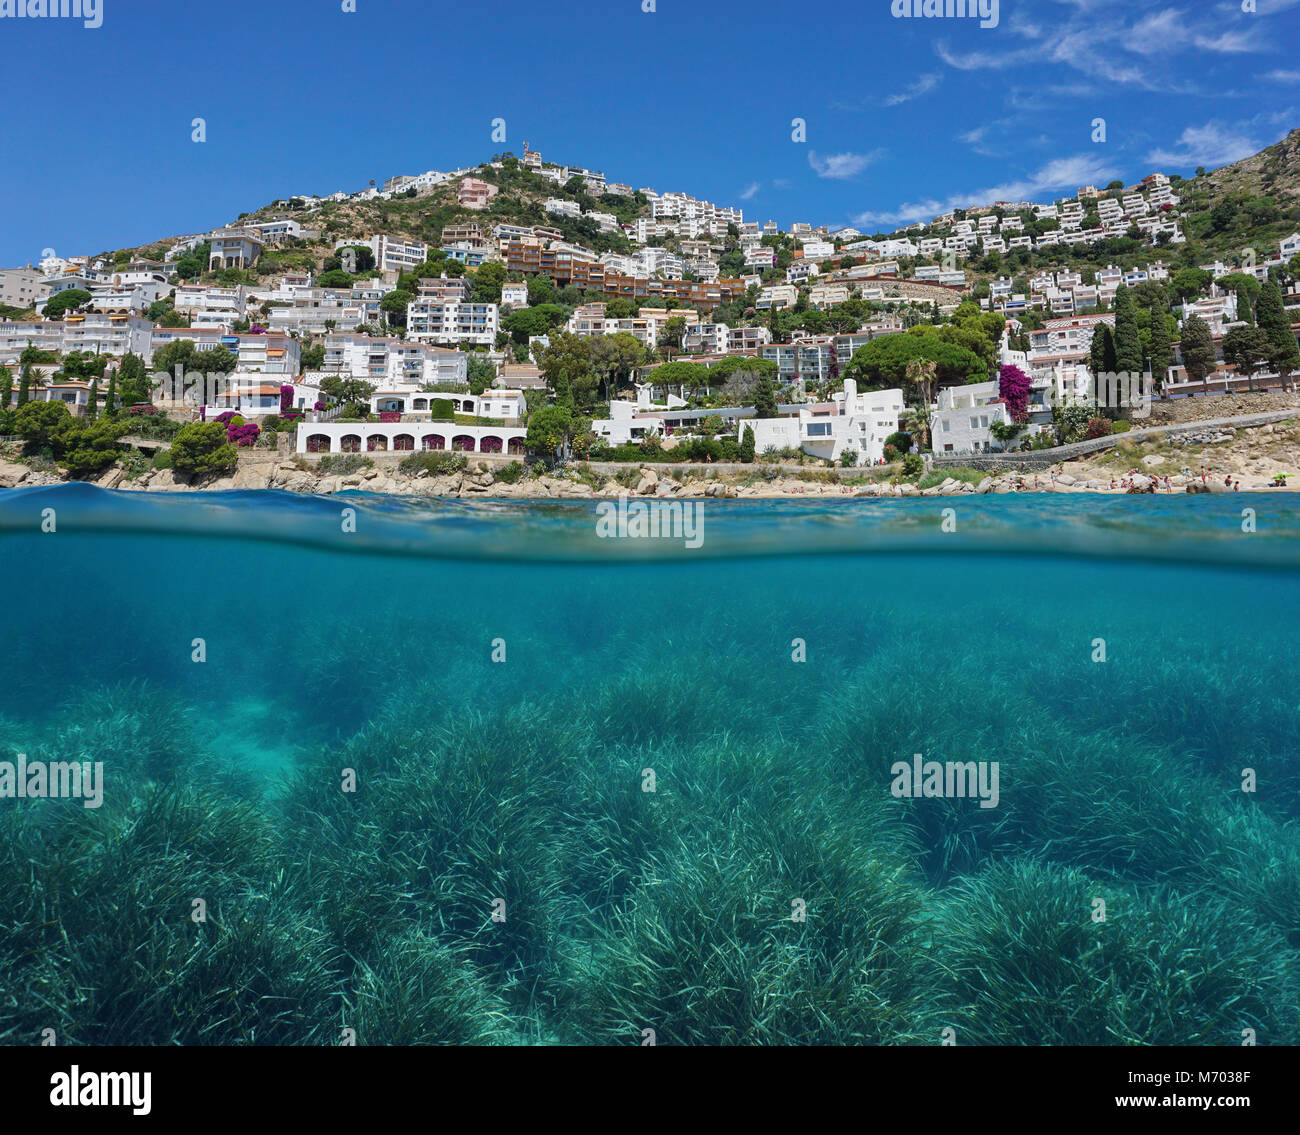 Spain coastline with buildings on the Costa Brava and neptune grass meadow underwater, split view above and below water surface, Mediterranean sea Stock Photo